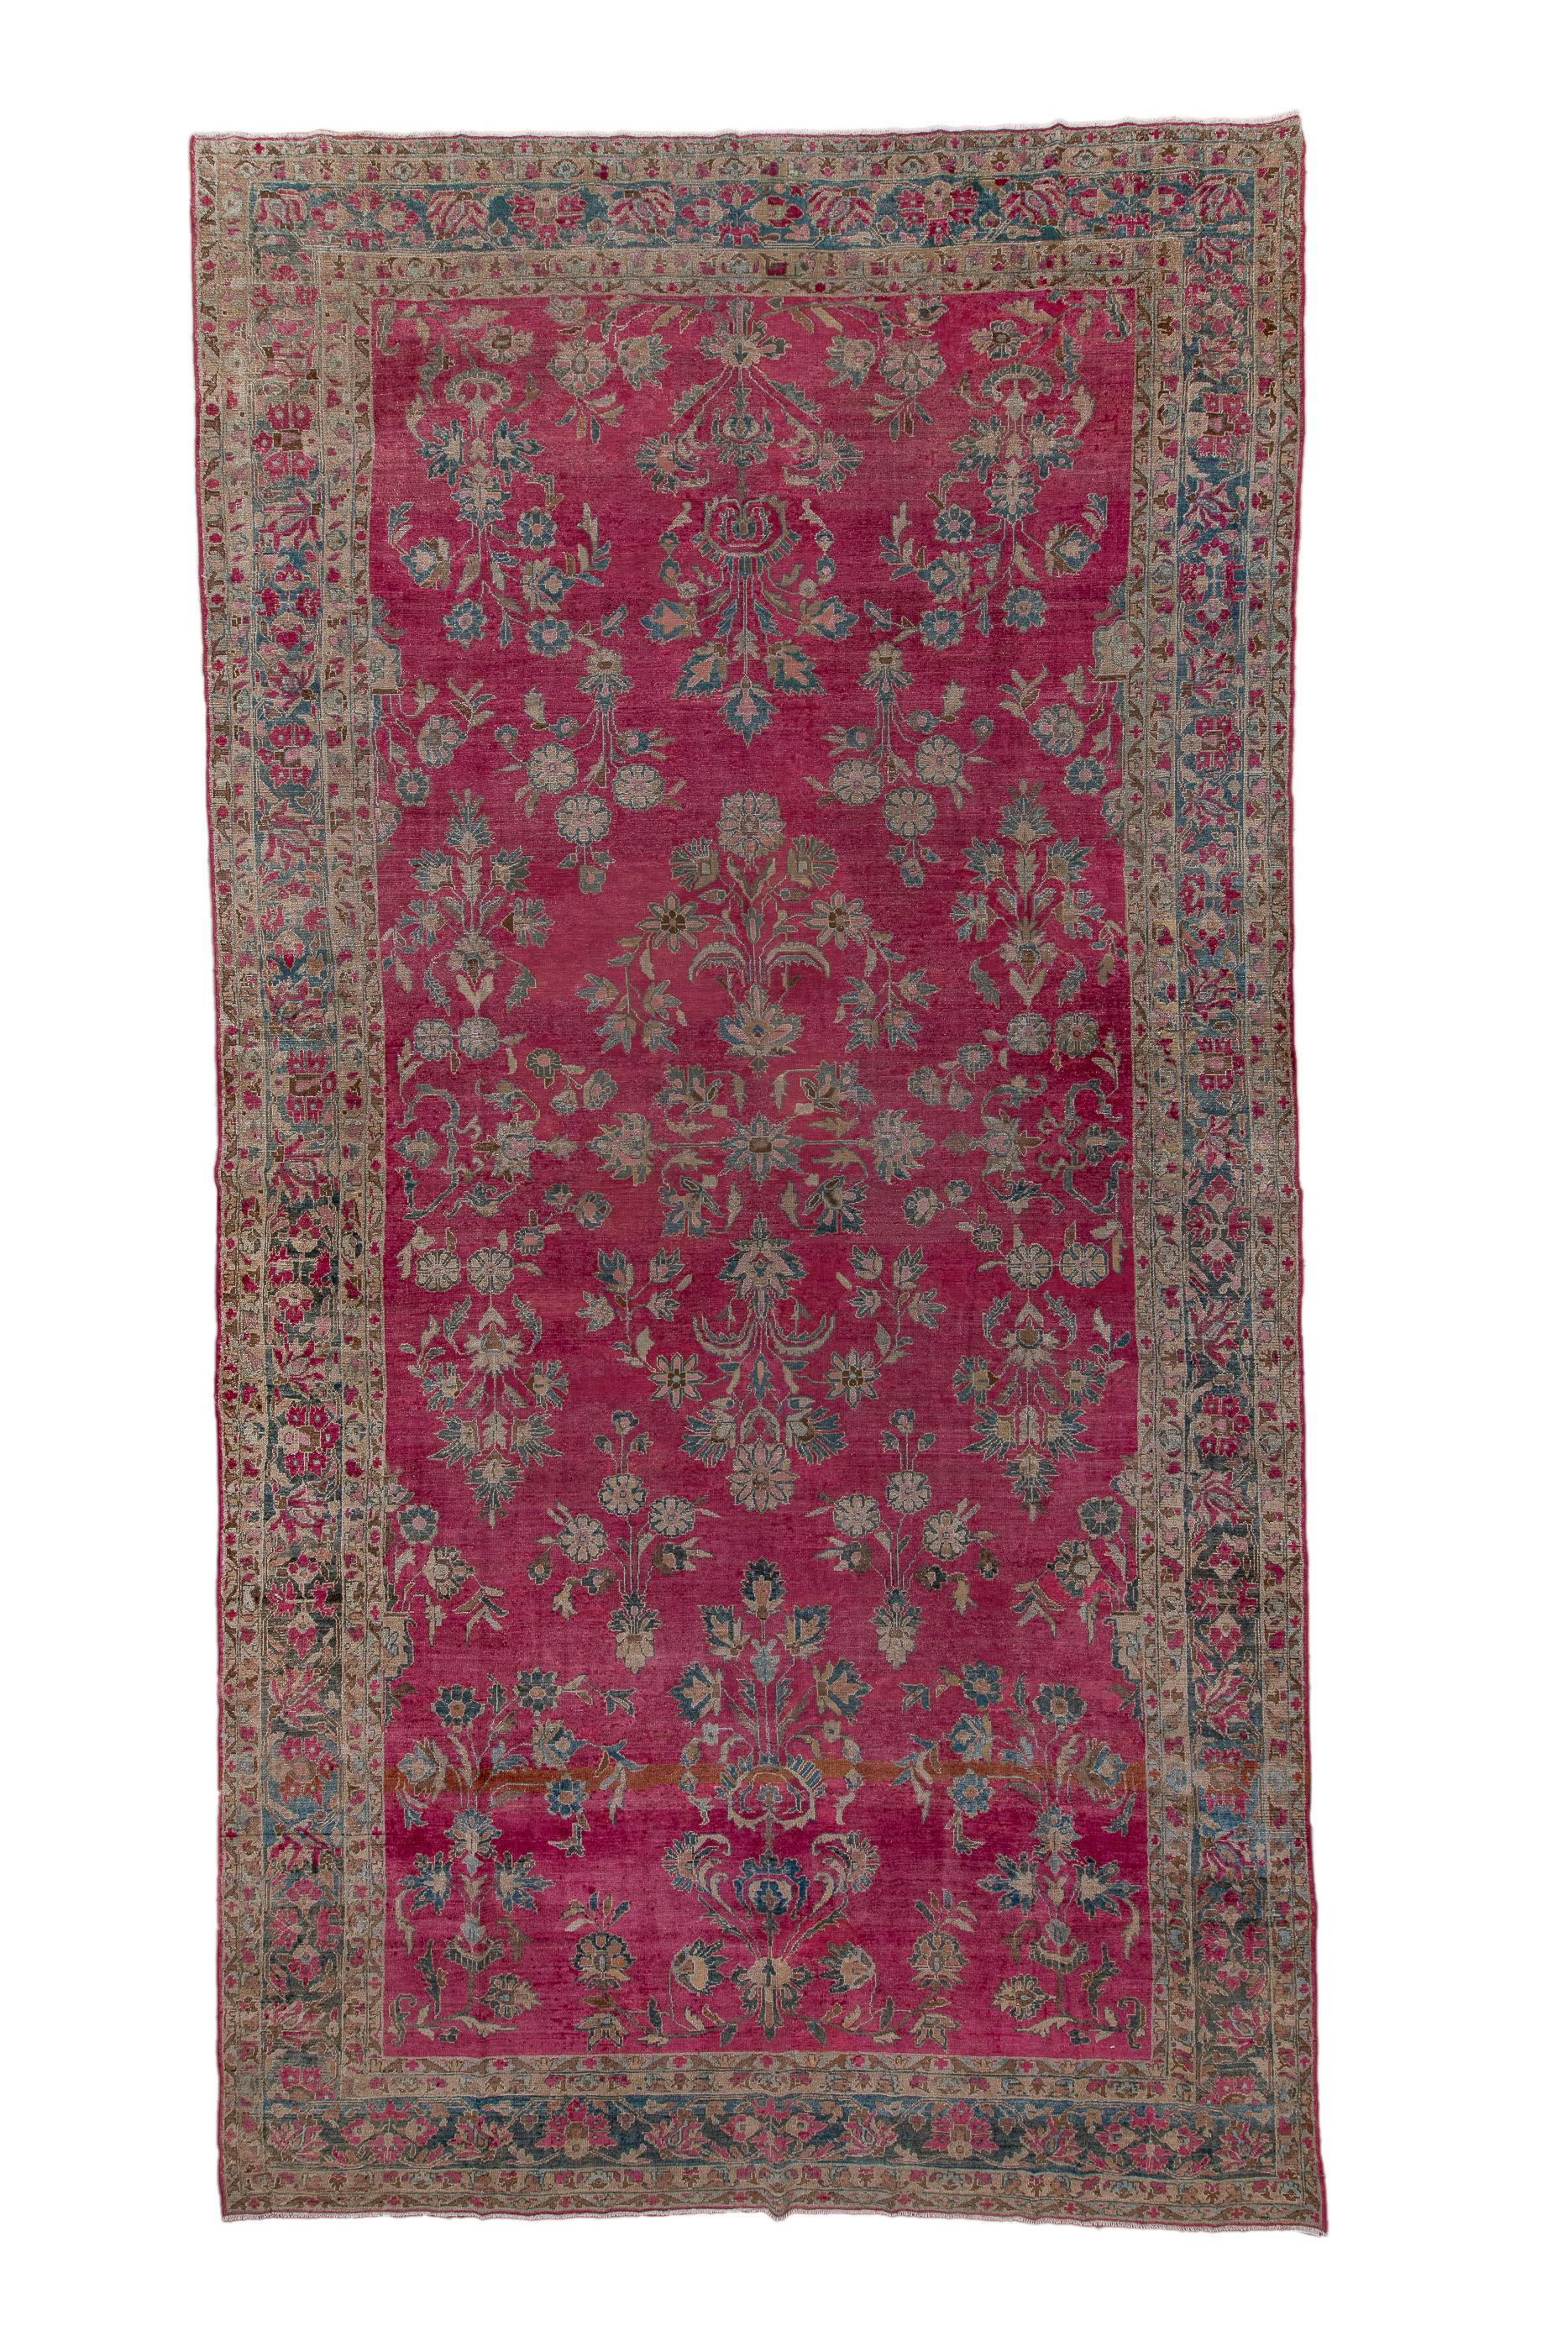 The mulberry red field of this village carpet hosts a selection of detached floral spray in the “American Sarouk” manner. A central radiating eight palmette motif centres the pattern. Border of tilted and upright petal palmettes. Allover details in